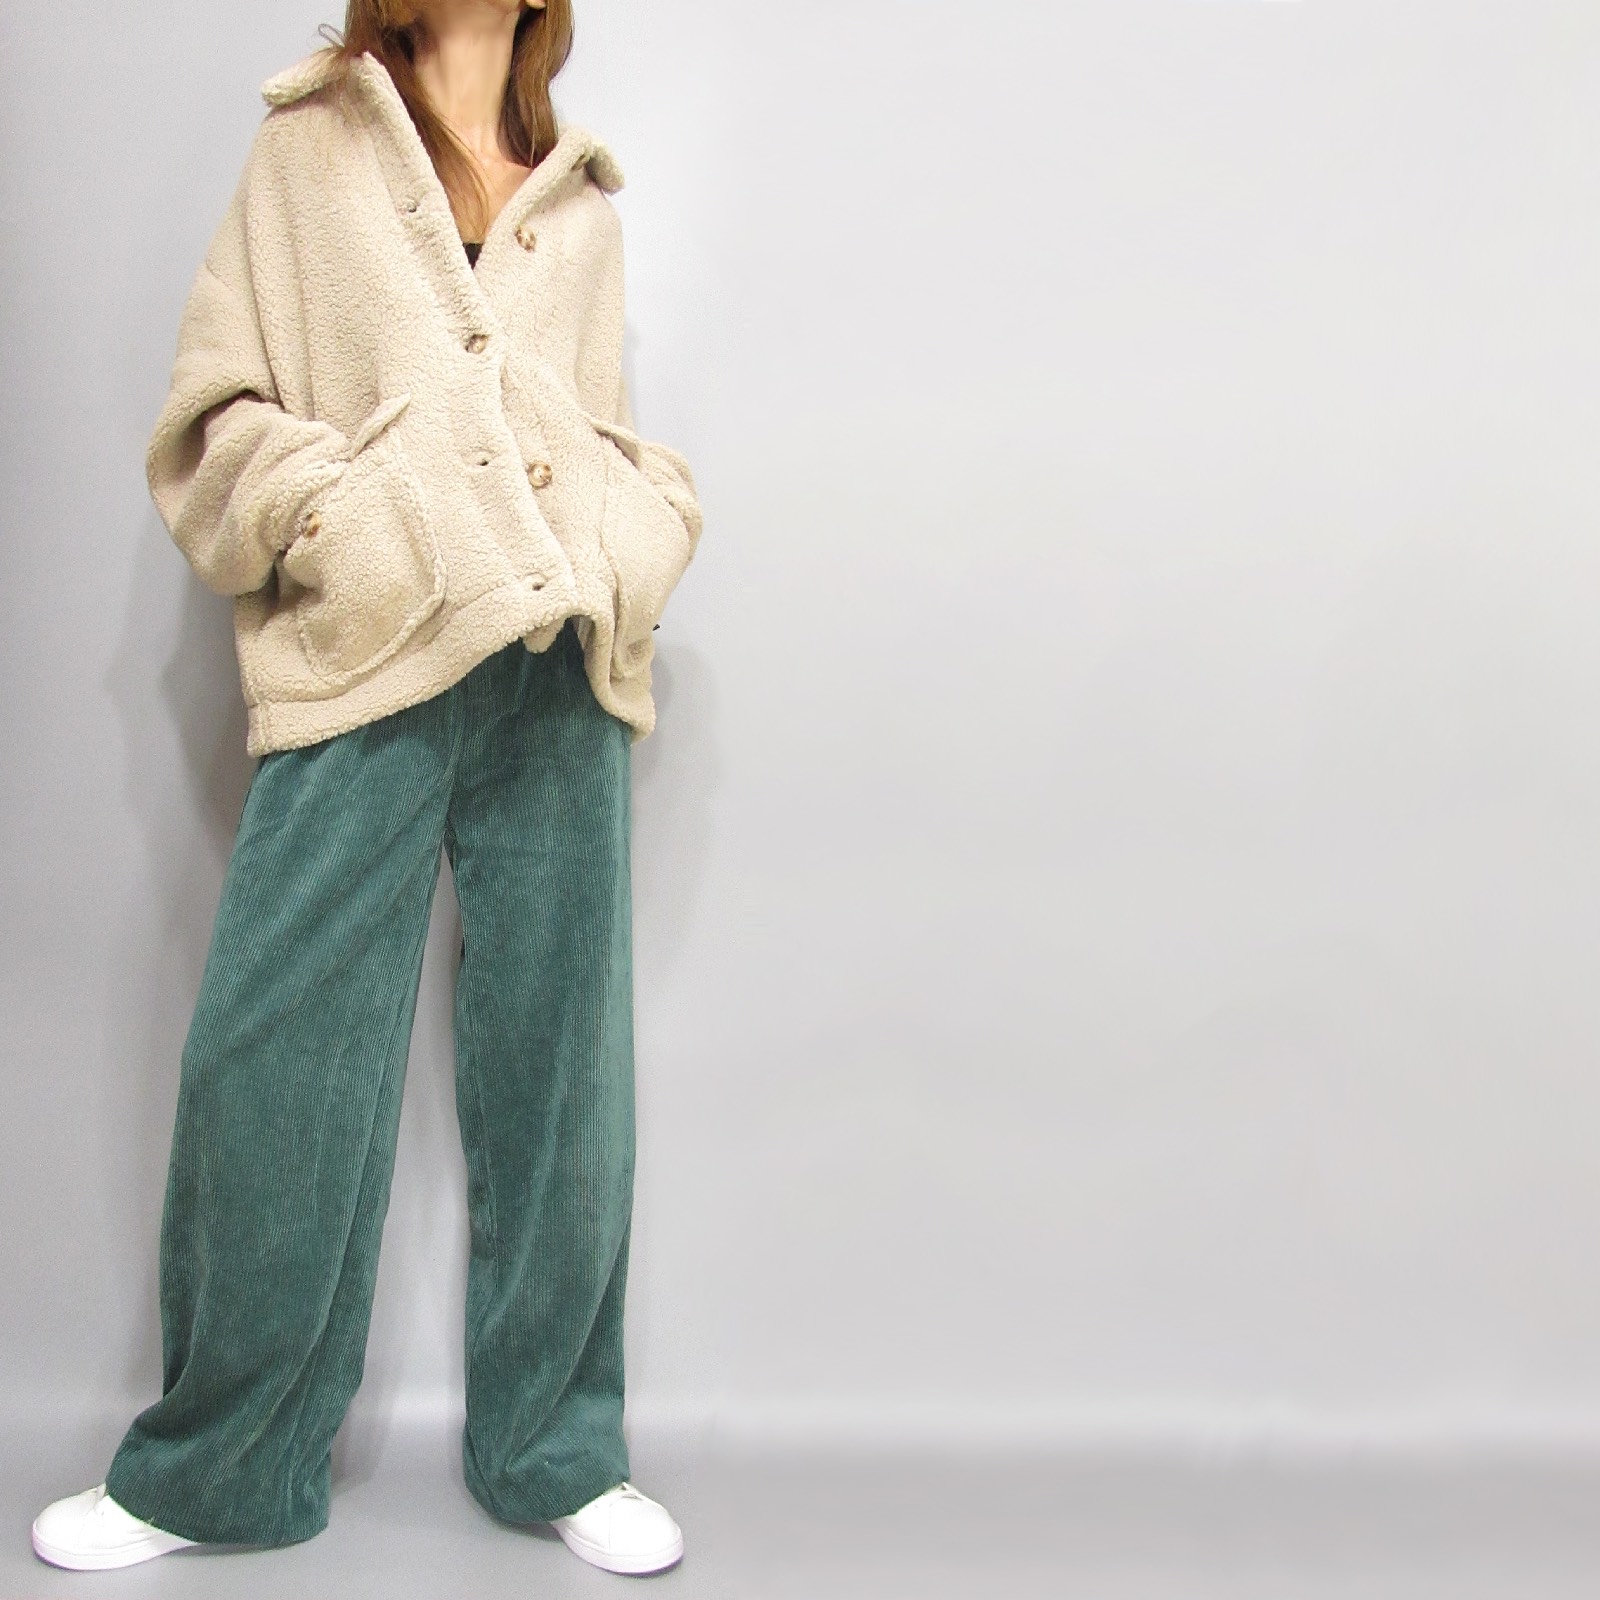 Coordinate2900/Outer108 & Tops838 & Pants273